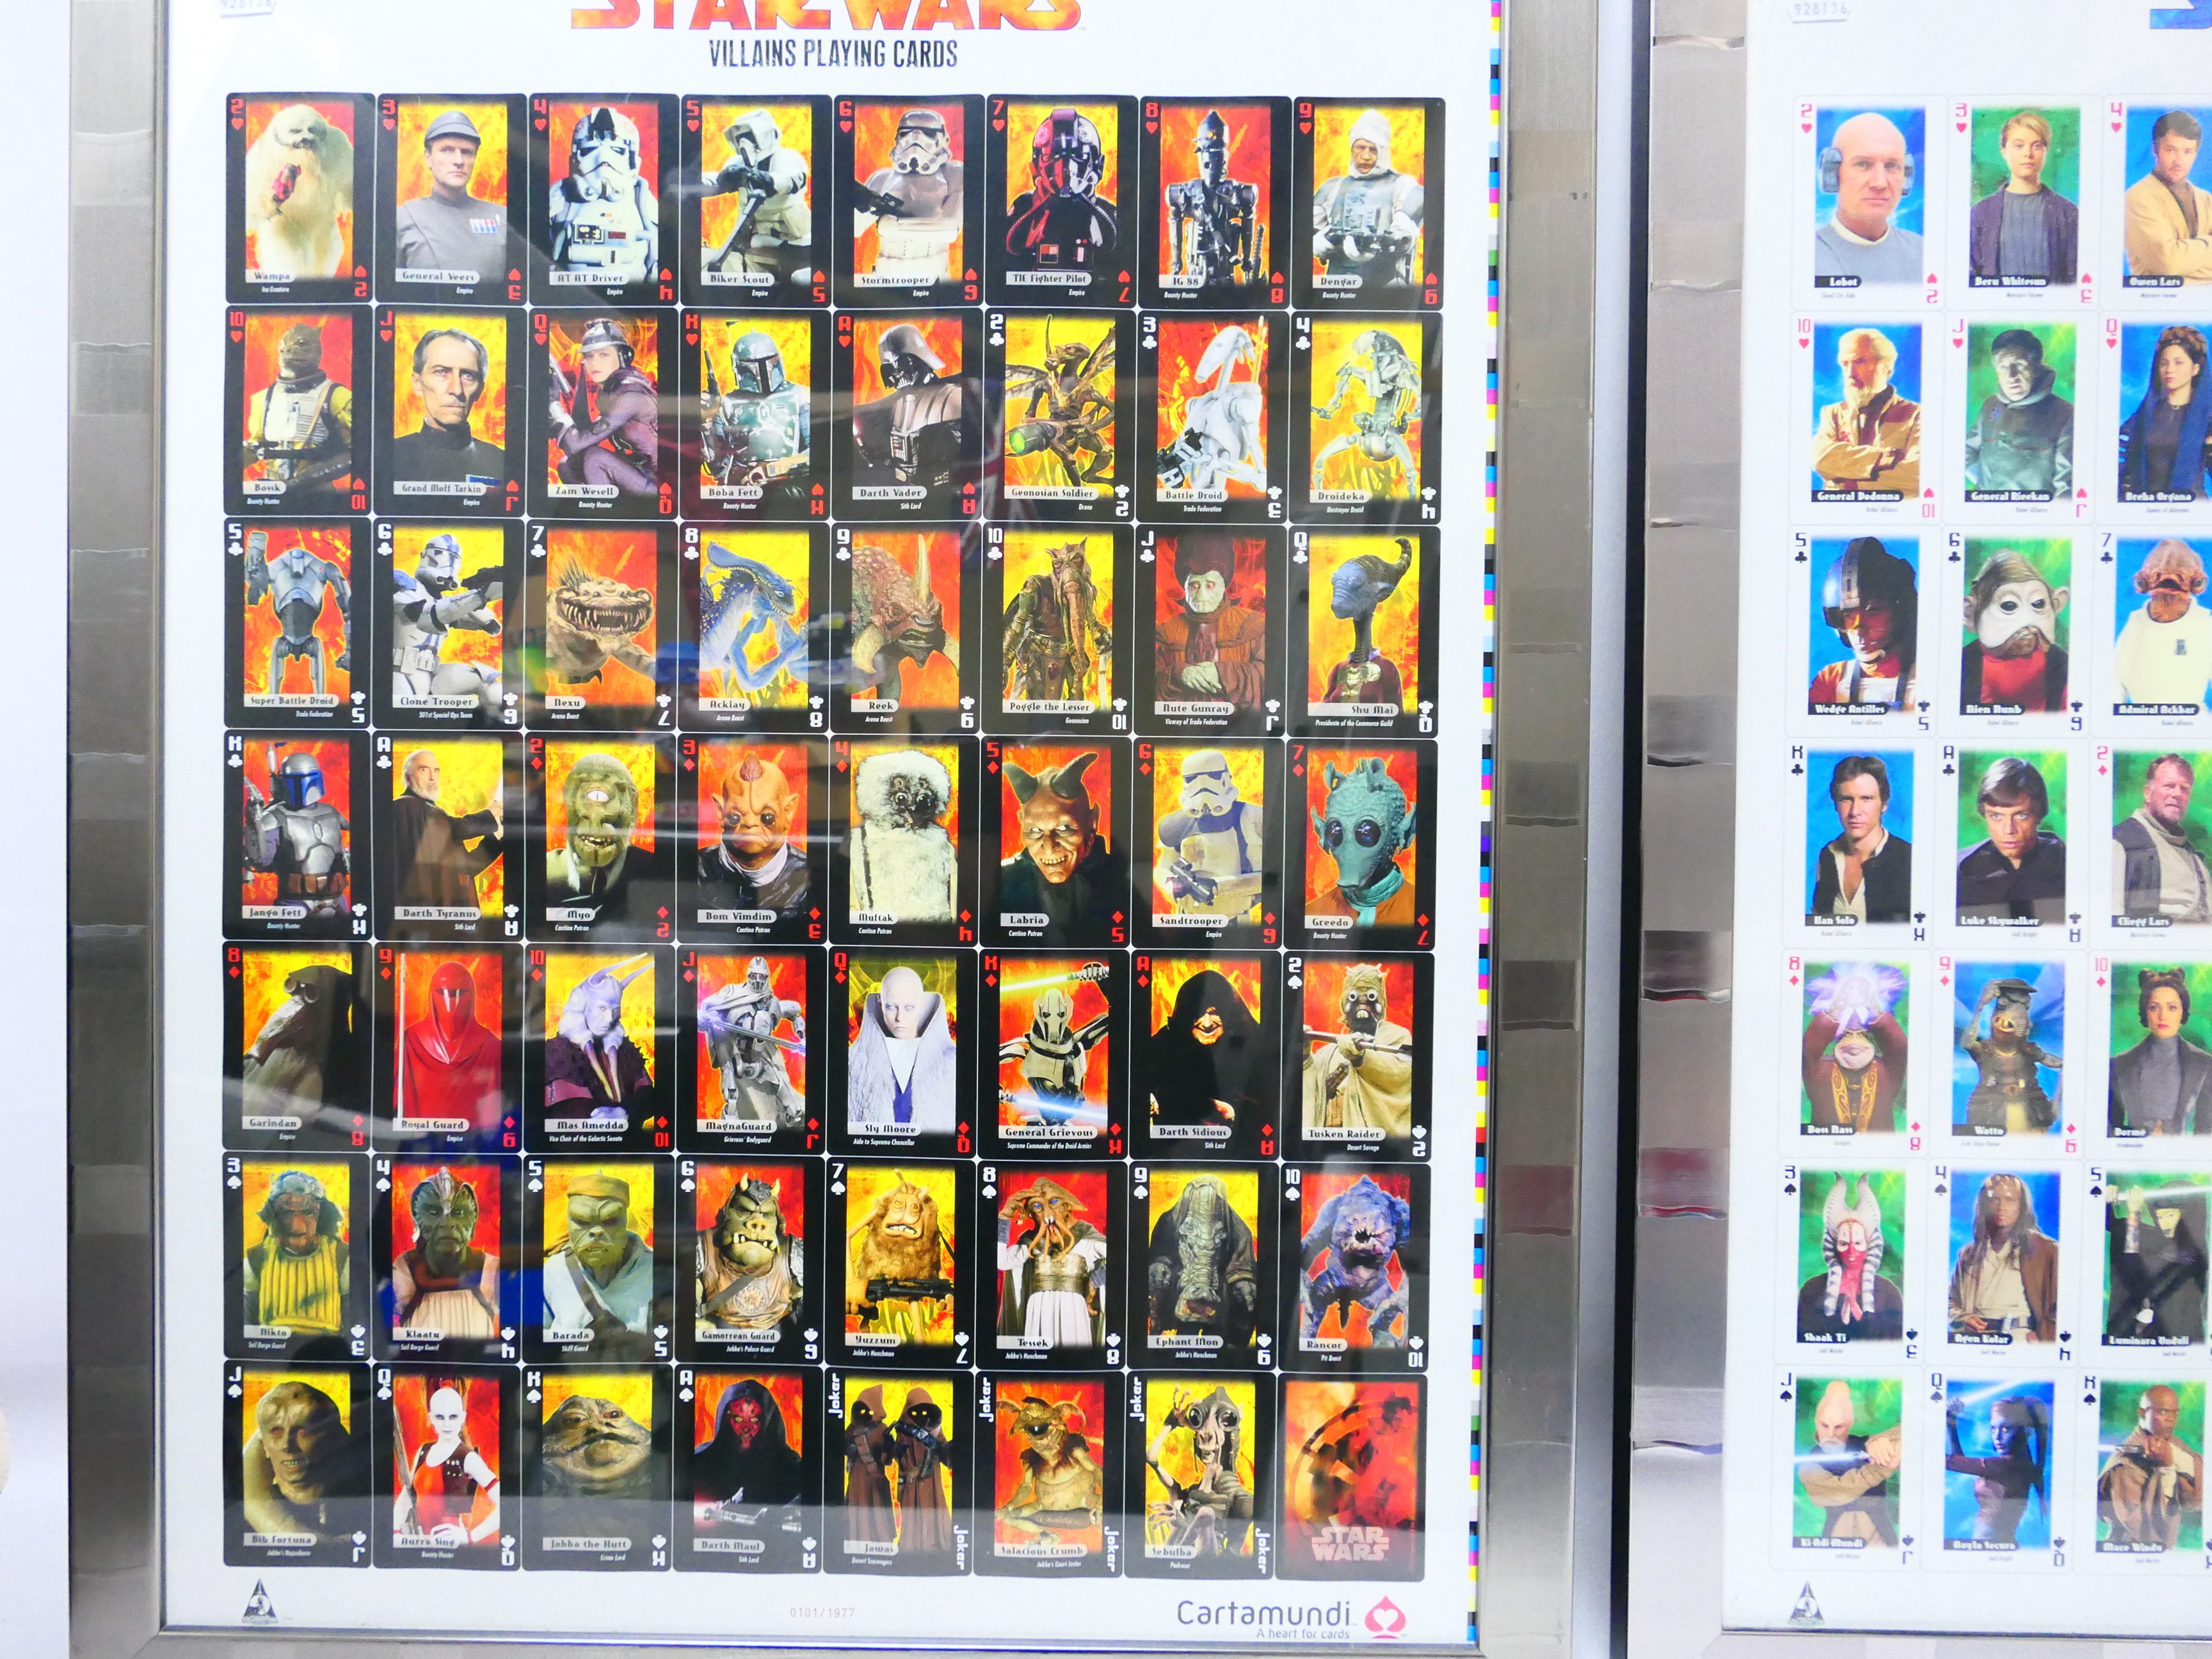 Star Wars - Two limited edition, framed display pieces of Cartamundi uncut playing card sheets, - Image 3 of 8